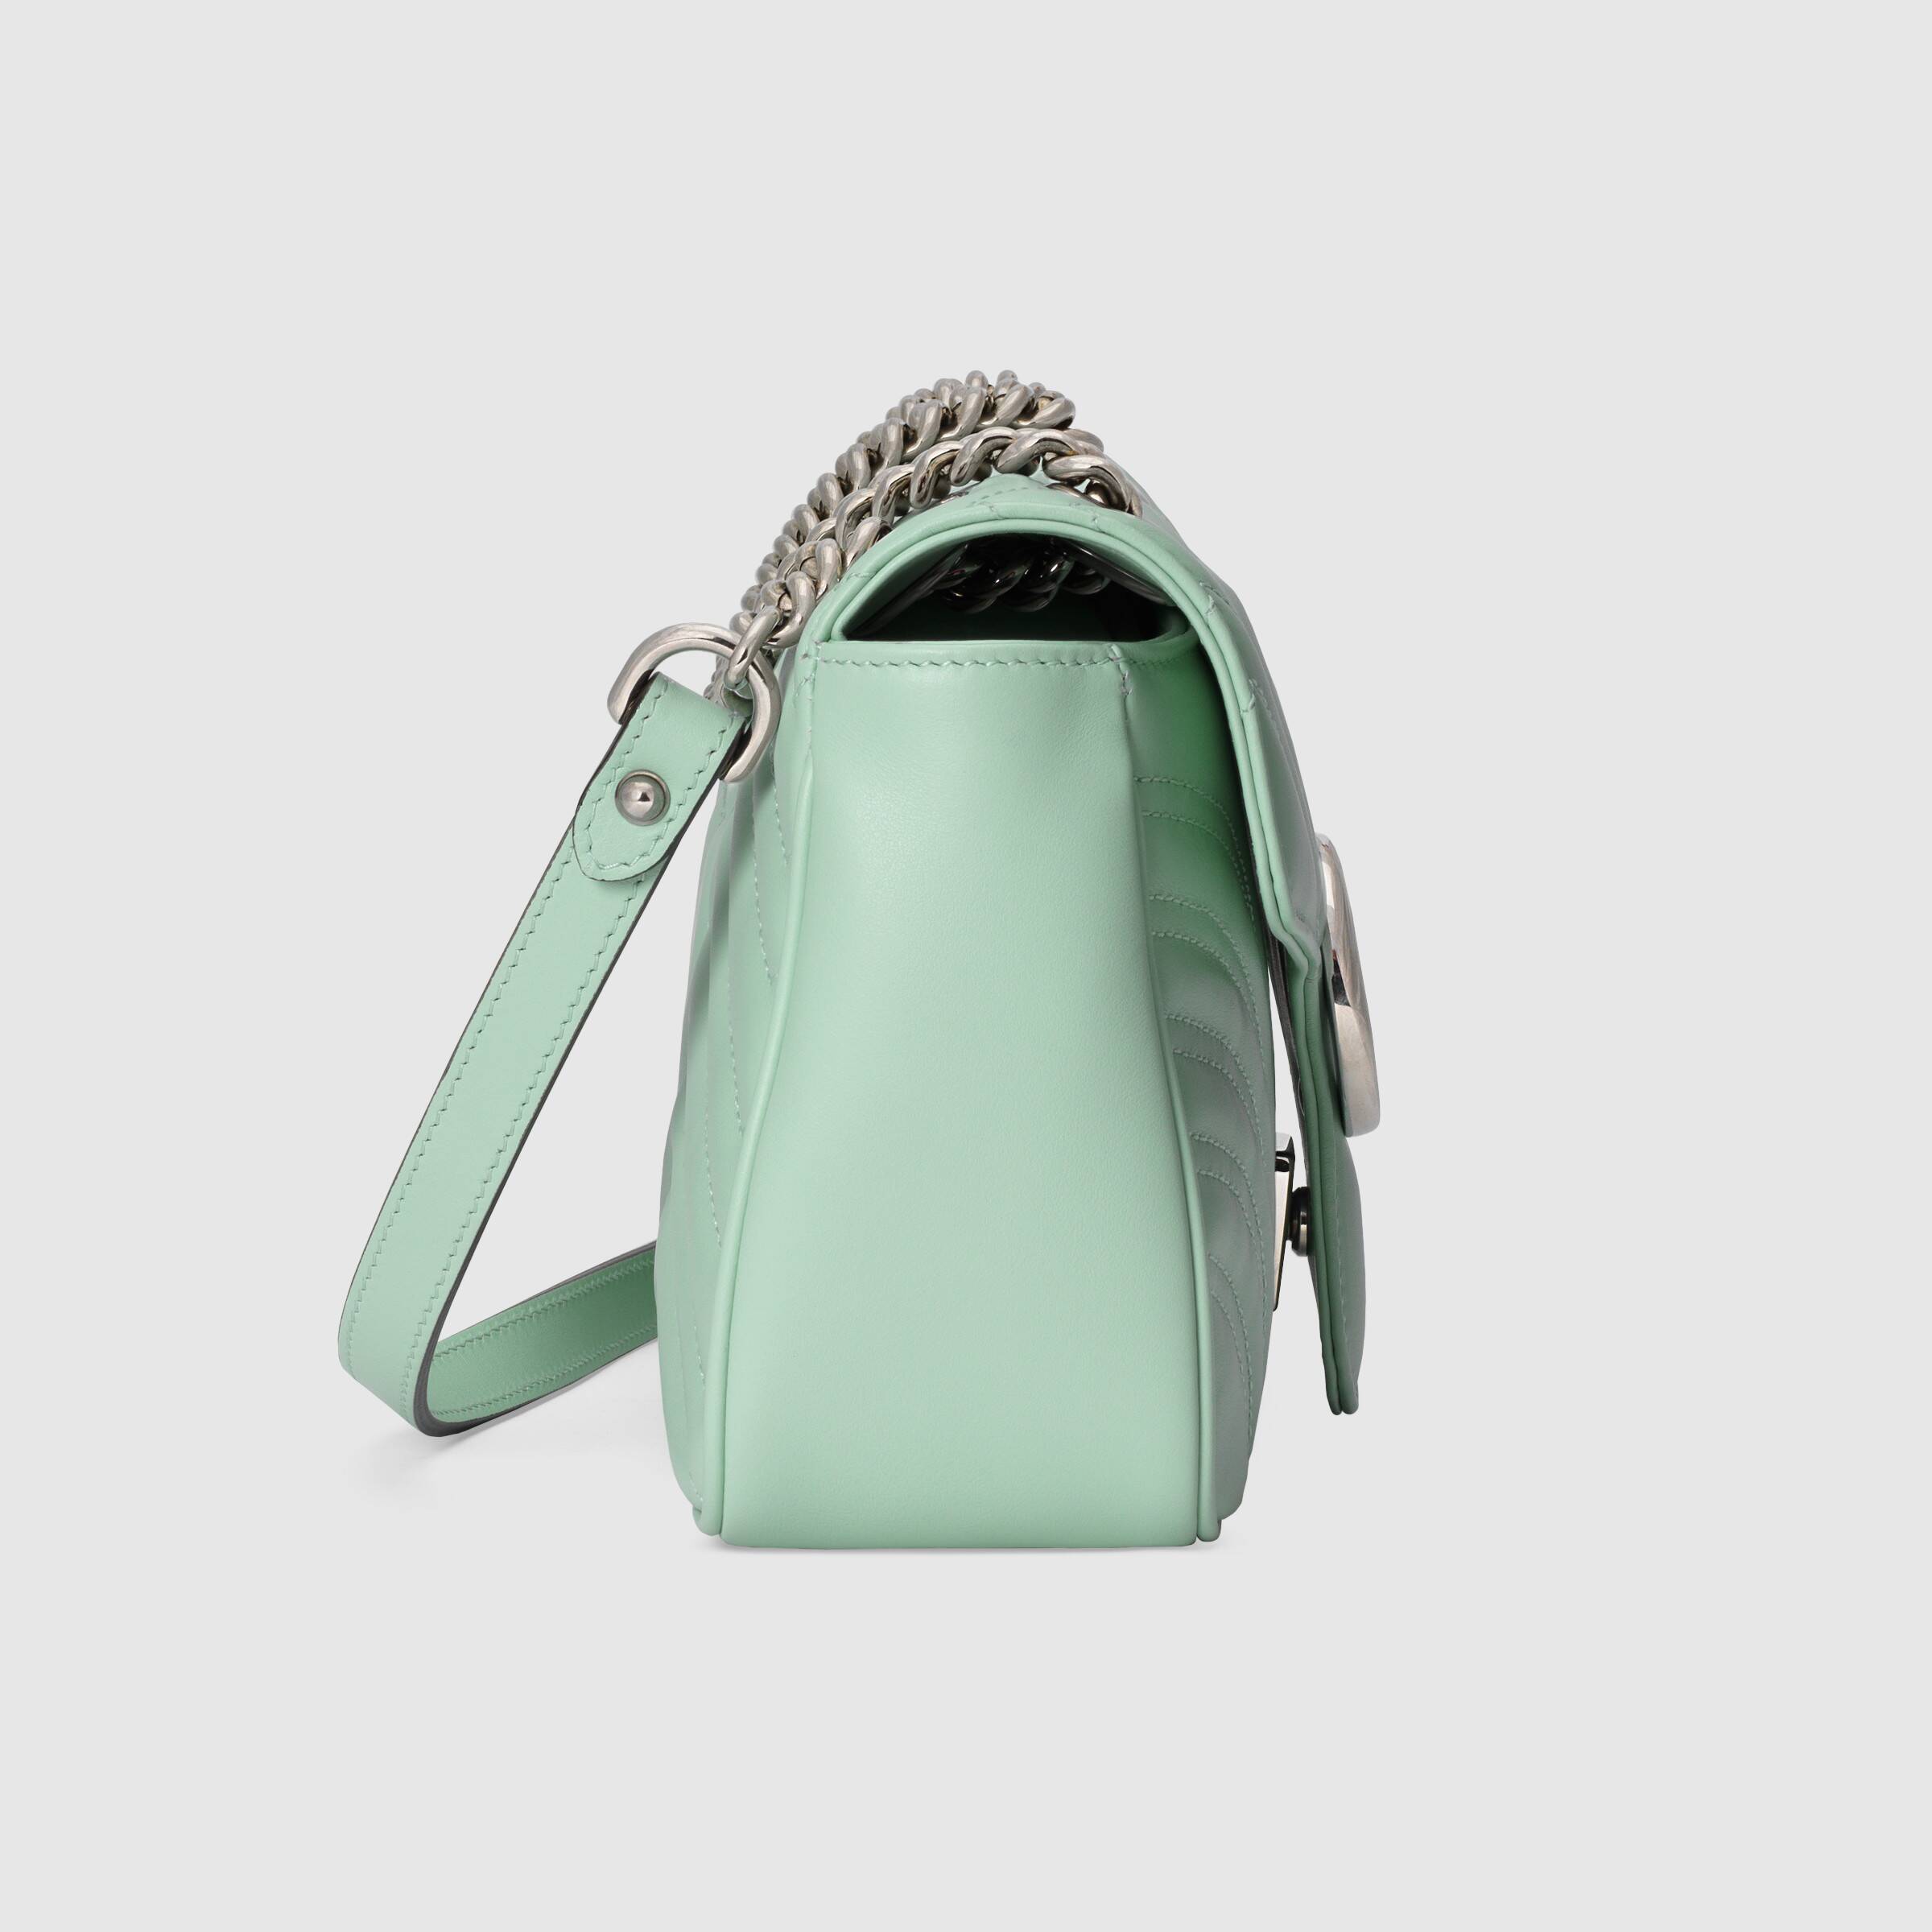 Gucci GG Marmont Small Shoulder Bag Pastel Green